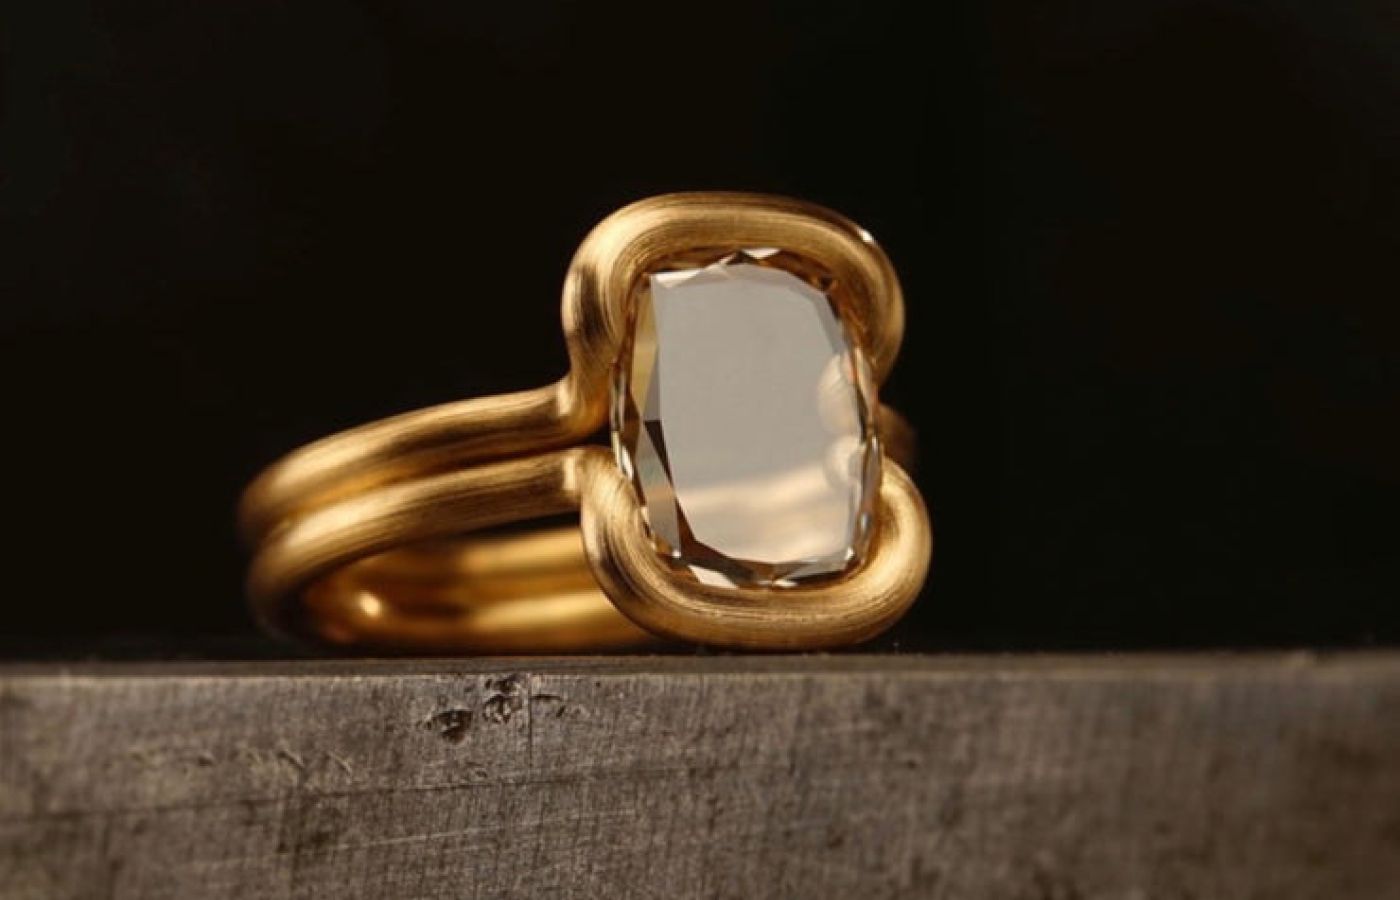 Leen Heyne x Thesis Champagne Portrait Cut Diamond ring in gold and diamond